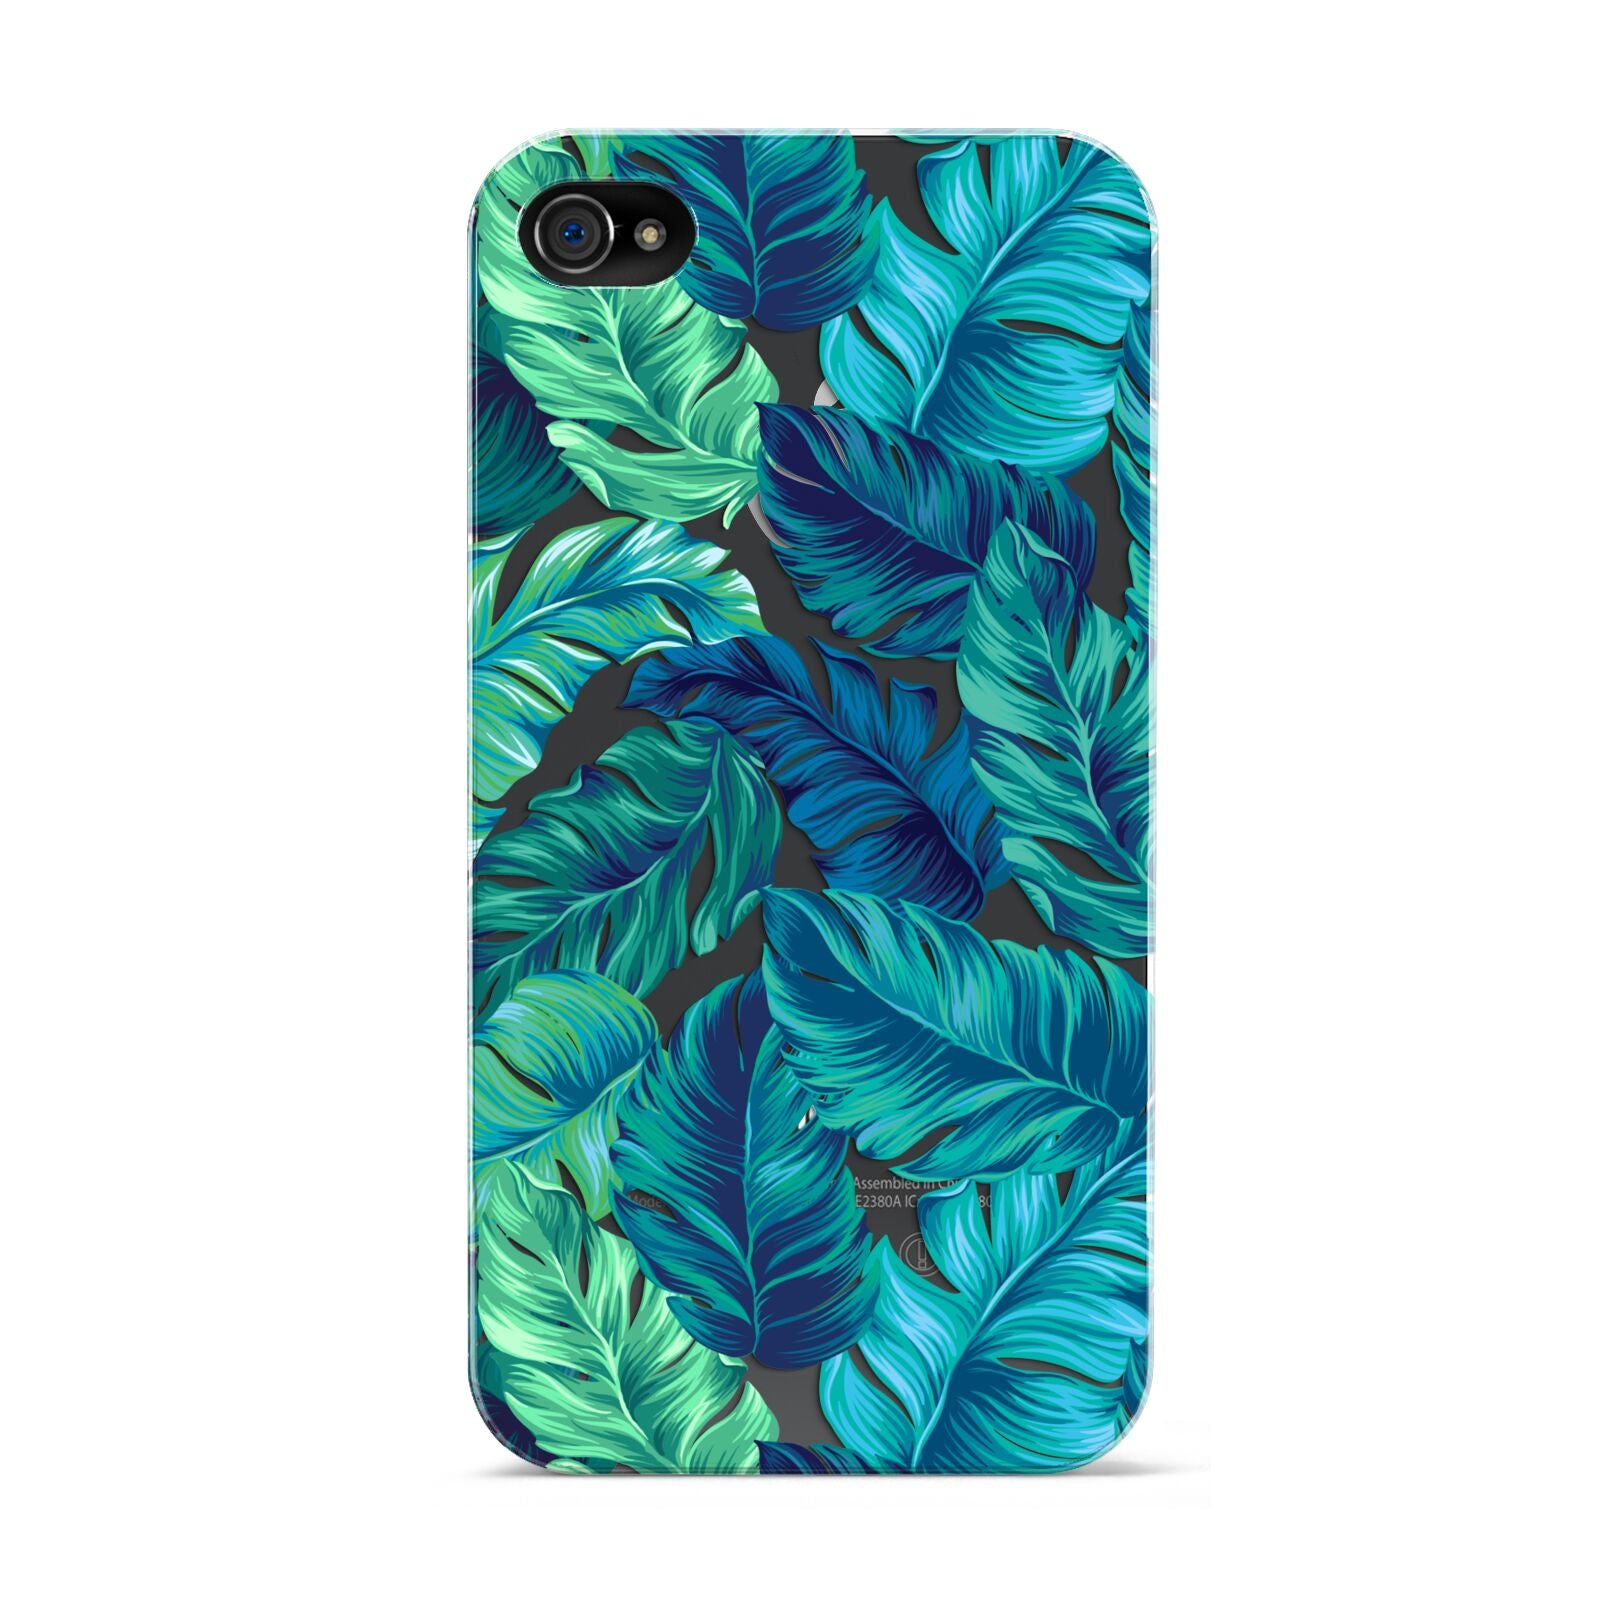 Tropical Leaves Apple iPhone 4s Case